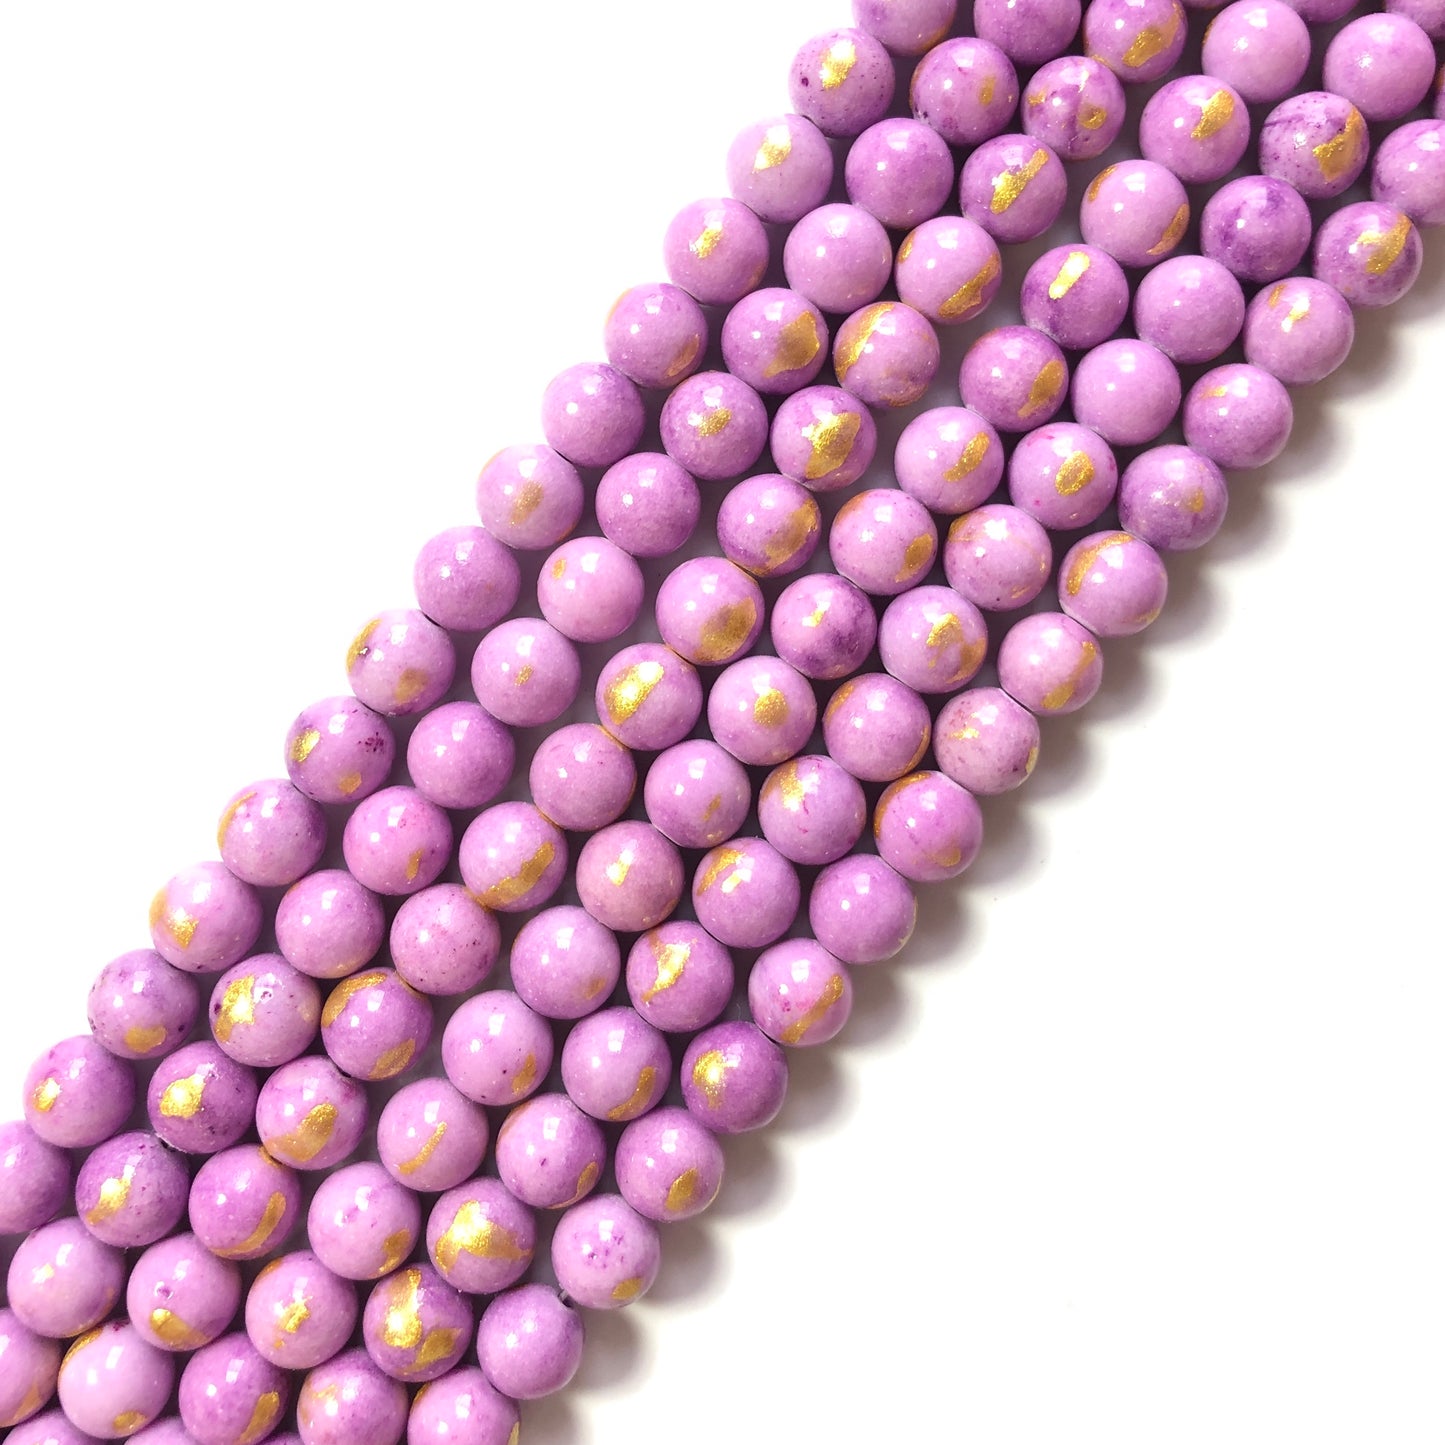 2 Strands/lot 8mm, 10mm Purple Gold Plated Jade Round Stone Beads Stone Beads 8mm Stone Beads Gold Plated Jade Beads Round Jade Beads Charms Beads Beyond